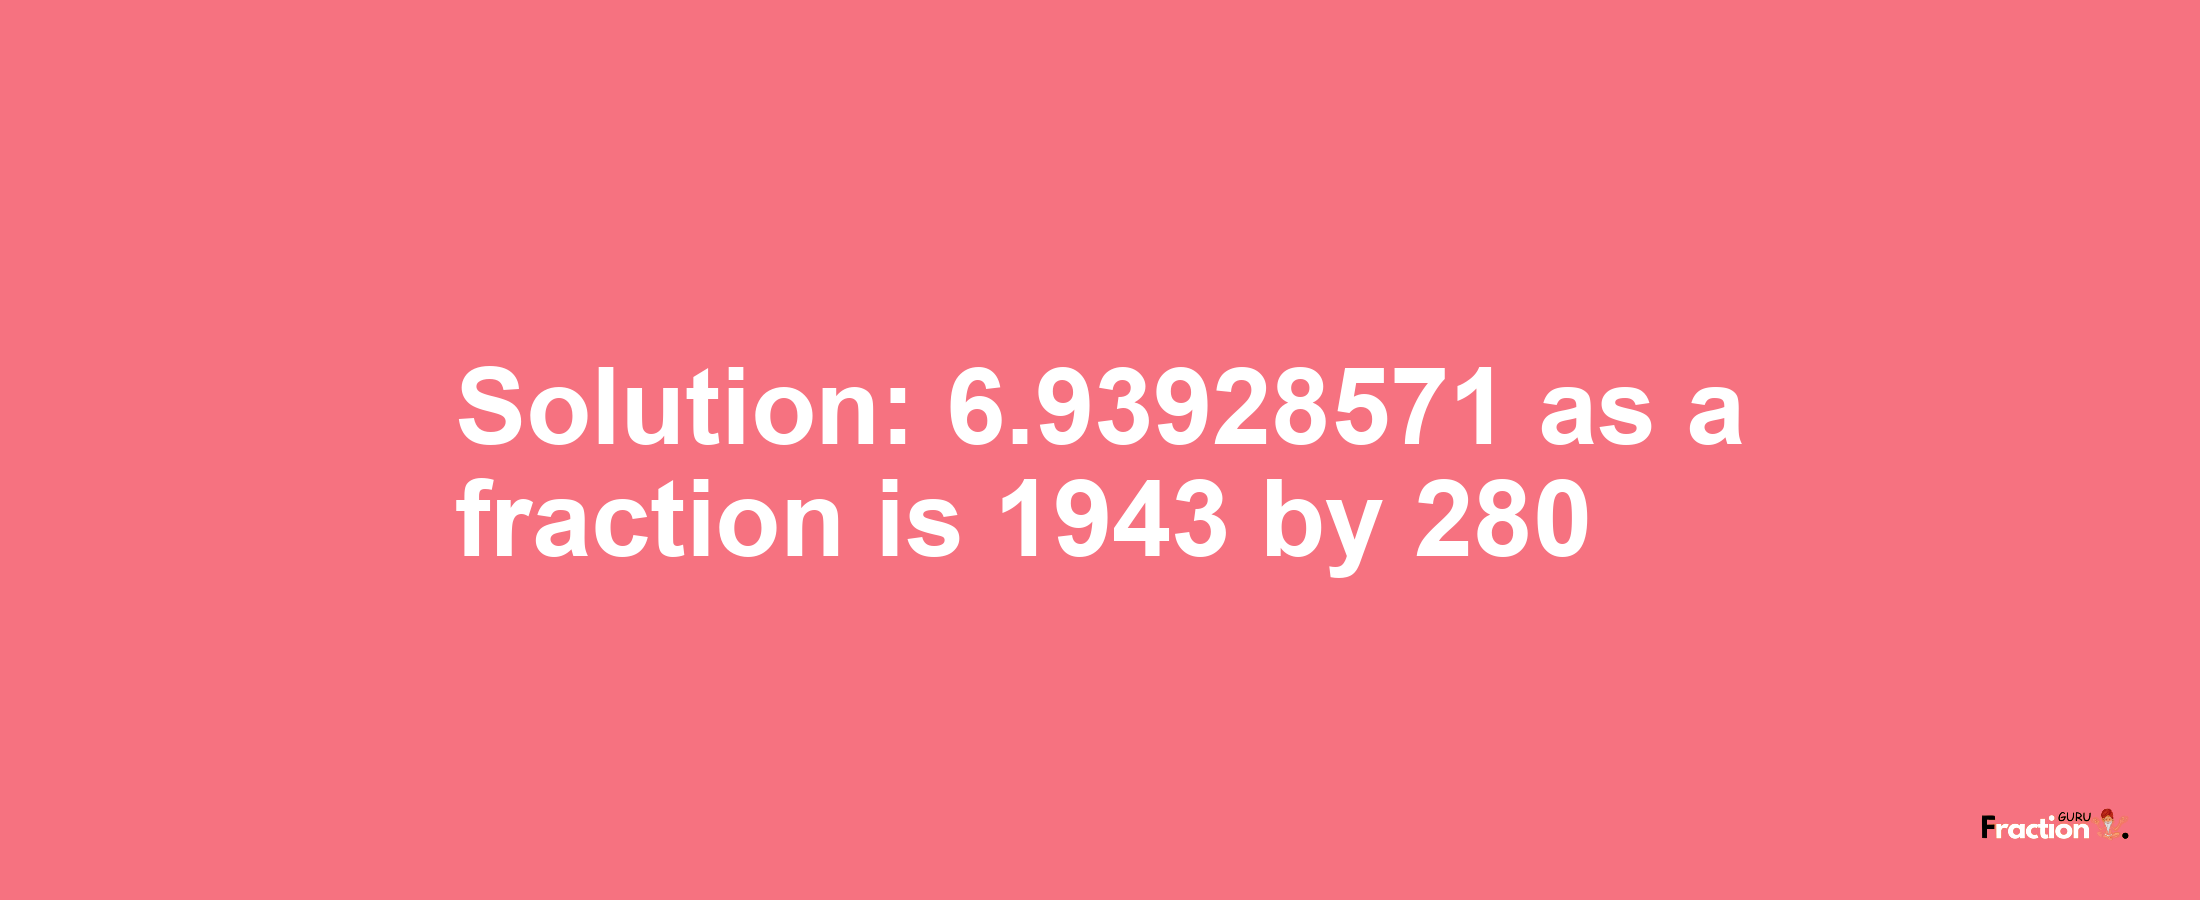 Solution:6.93928571 as a fraction is 1943/280